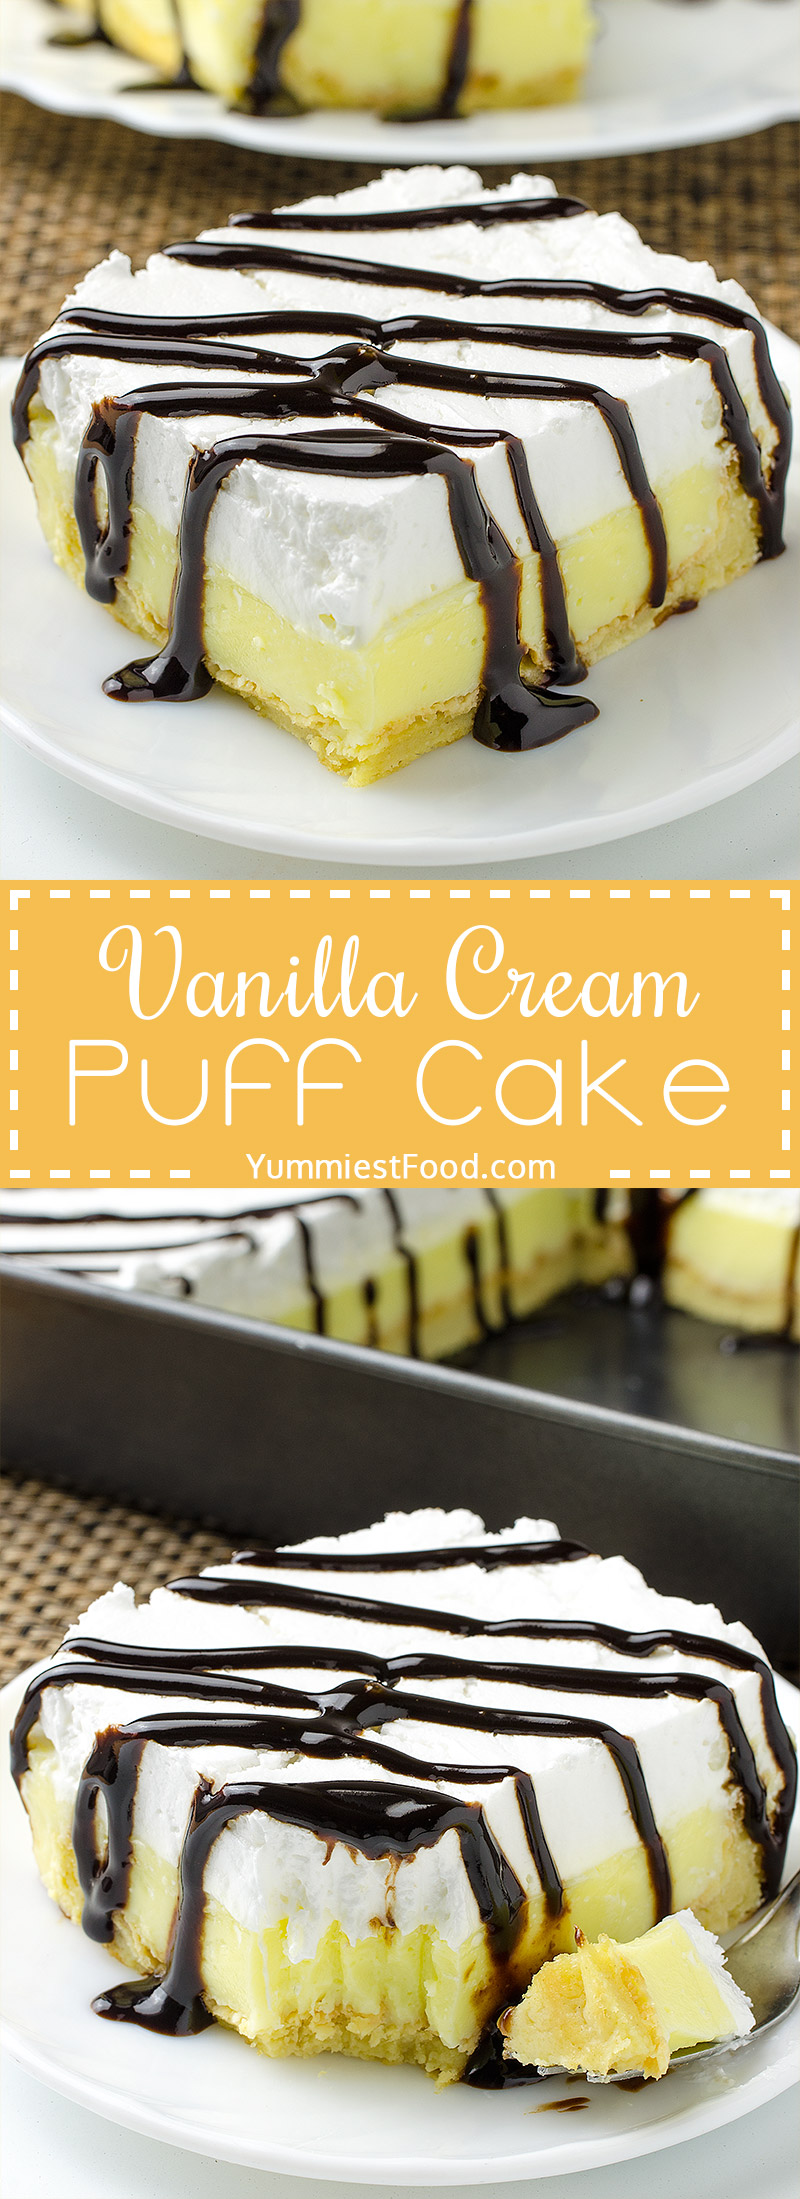 Vanilla Cream Puff Cake or Eclair Cake - so easy, quick and creamy! Perfect combination with vanilla and chocolate